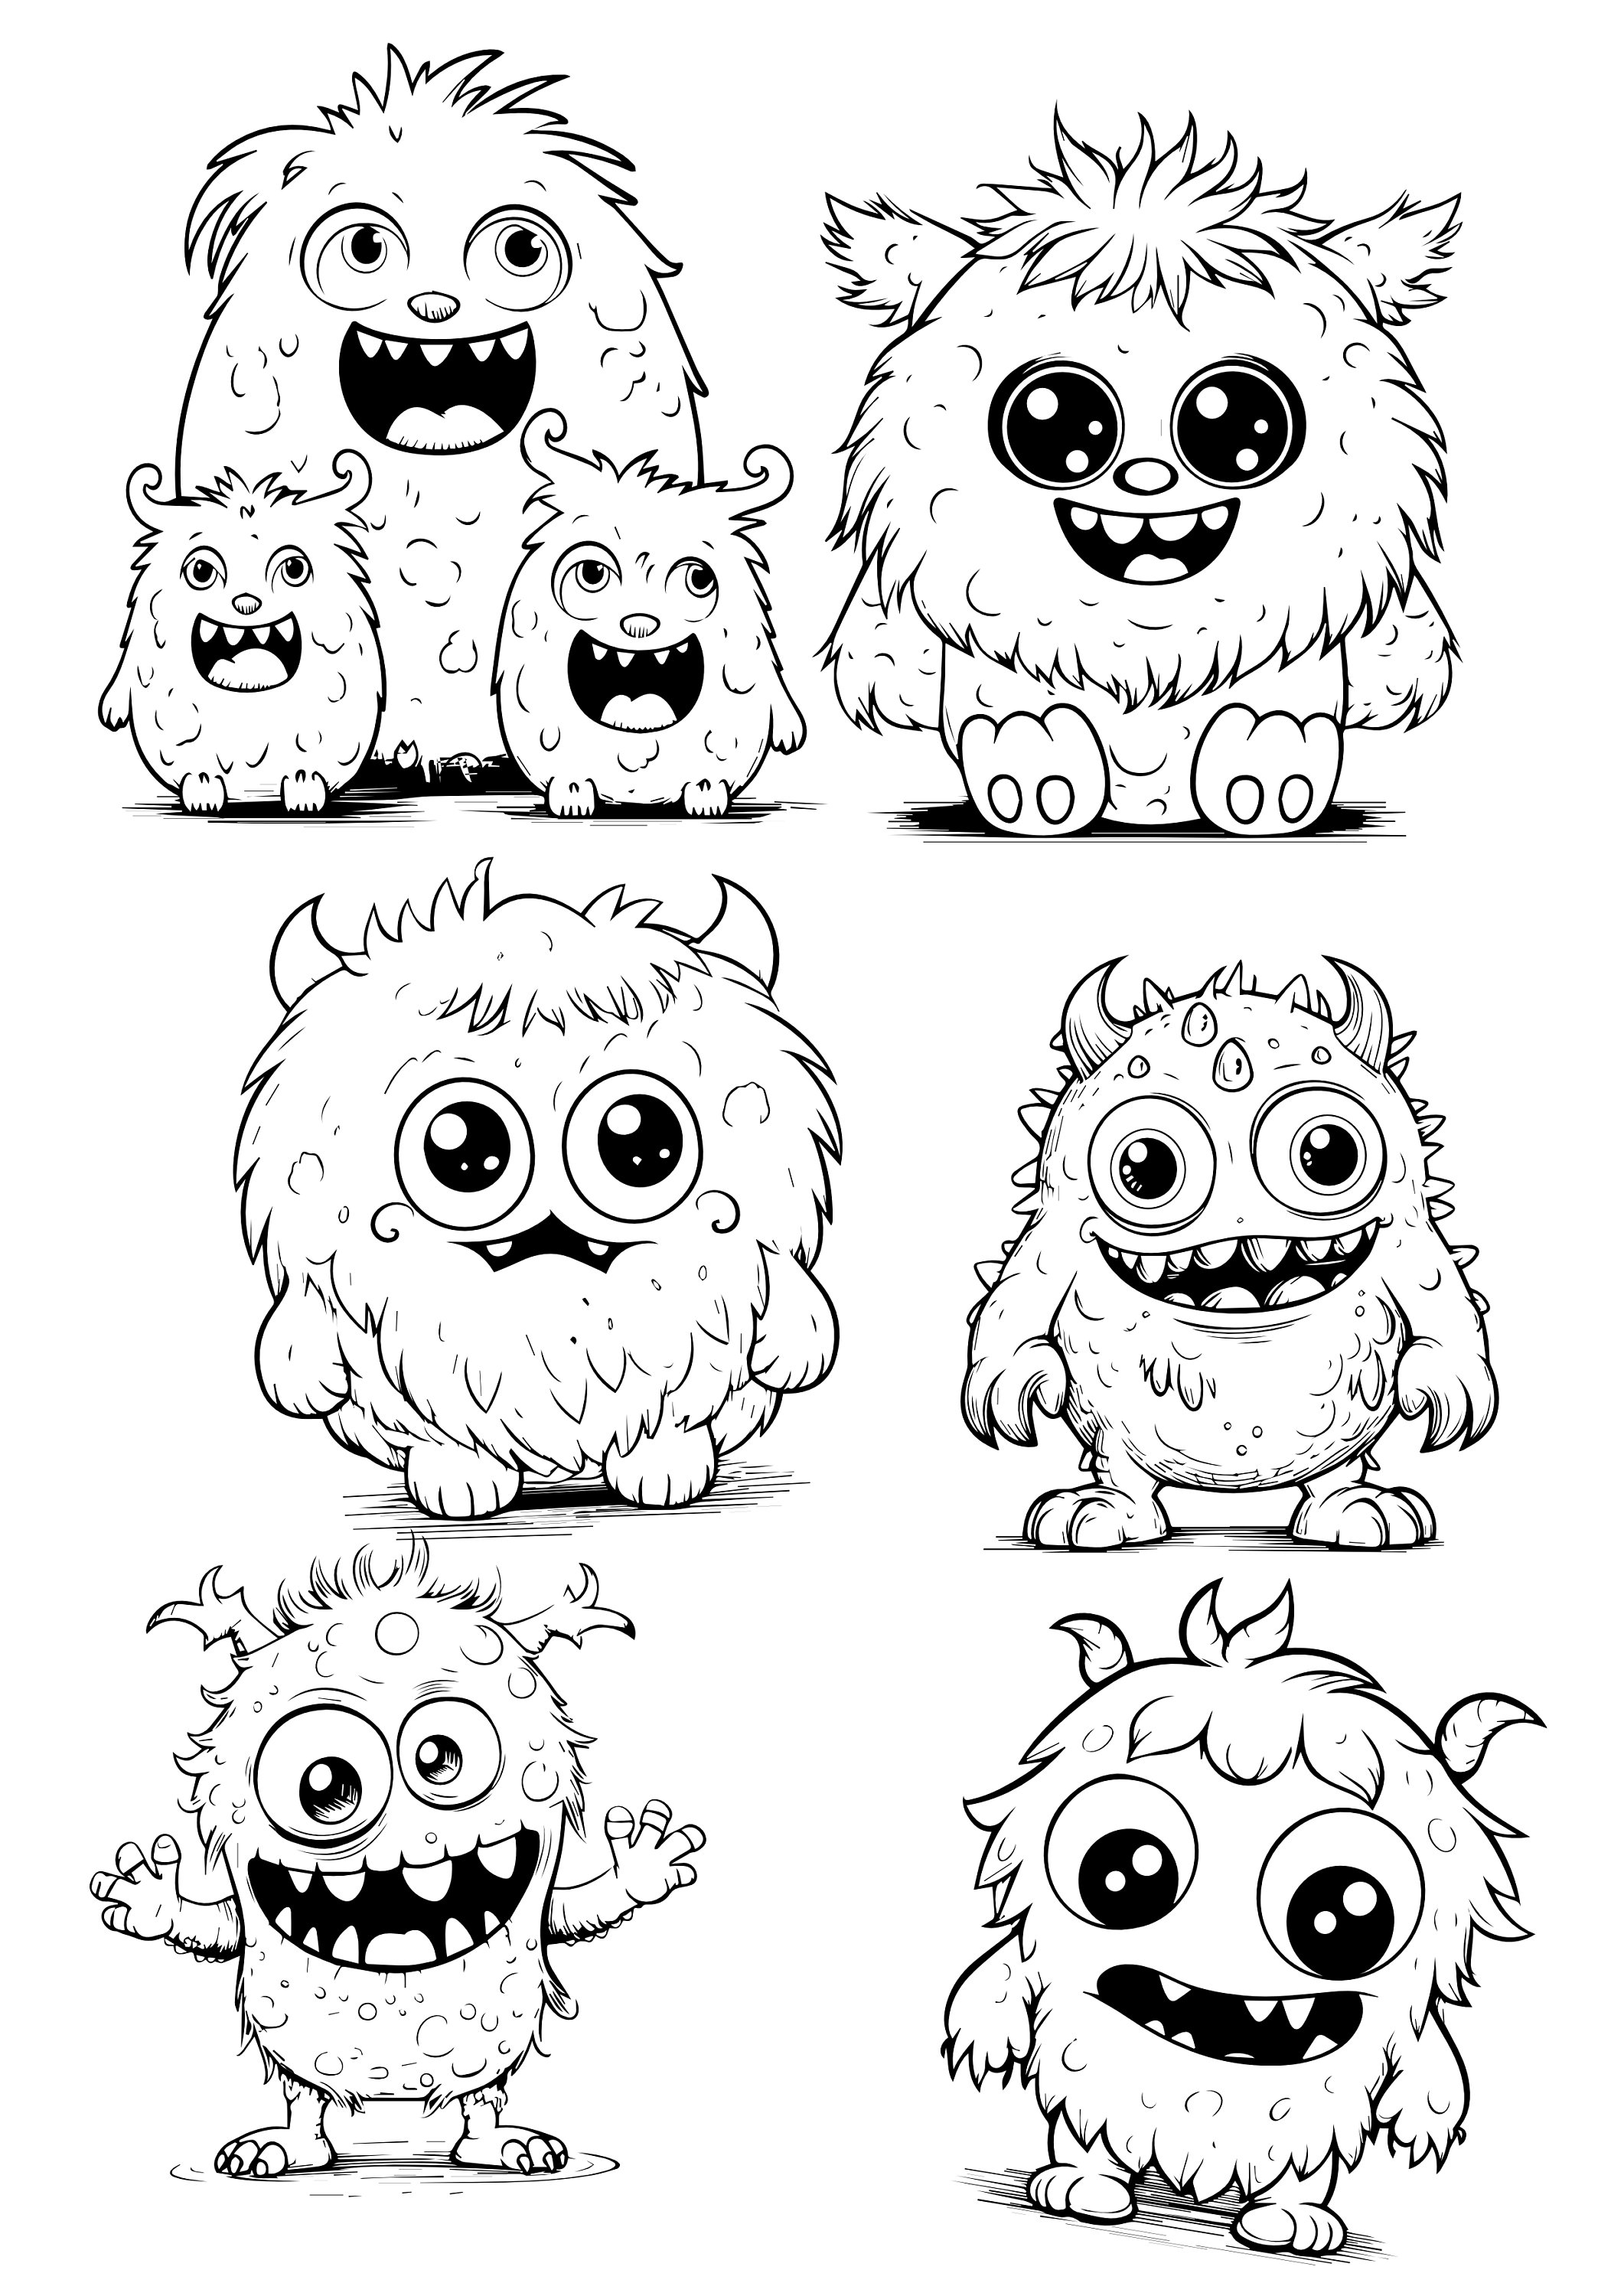 Here are cute monster coloring pages that are perfect for kids ideal as kids coloring sheets for printing at childrens party activities